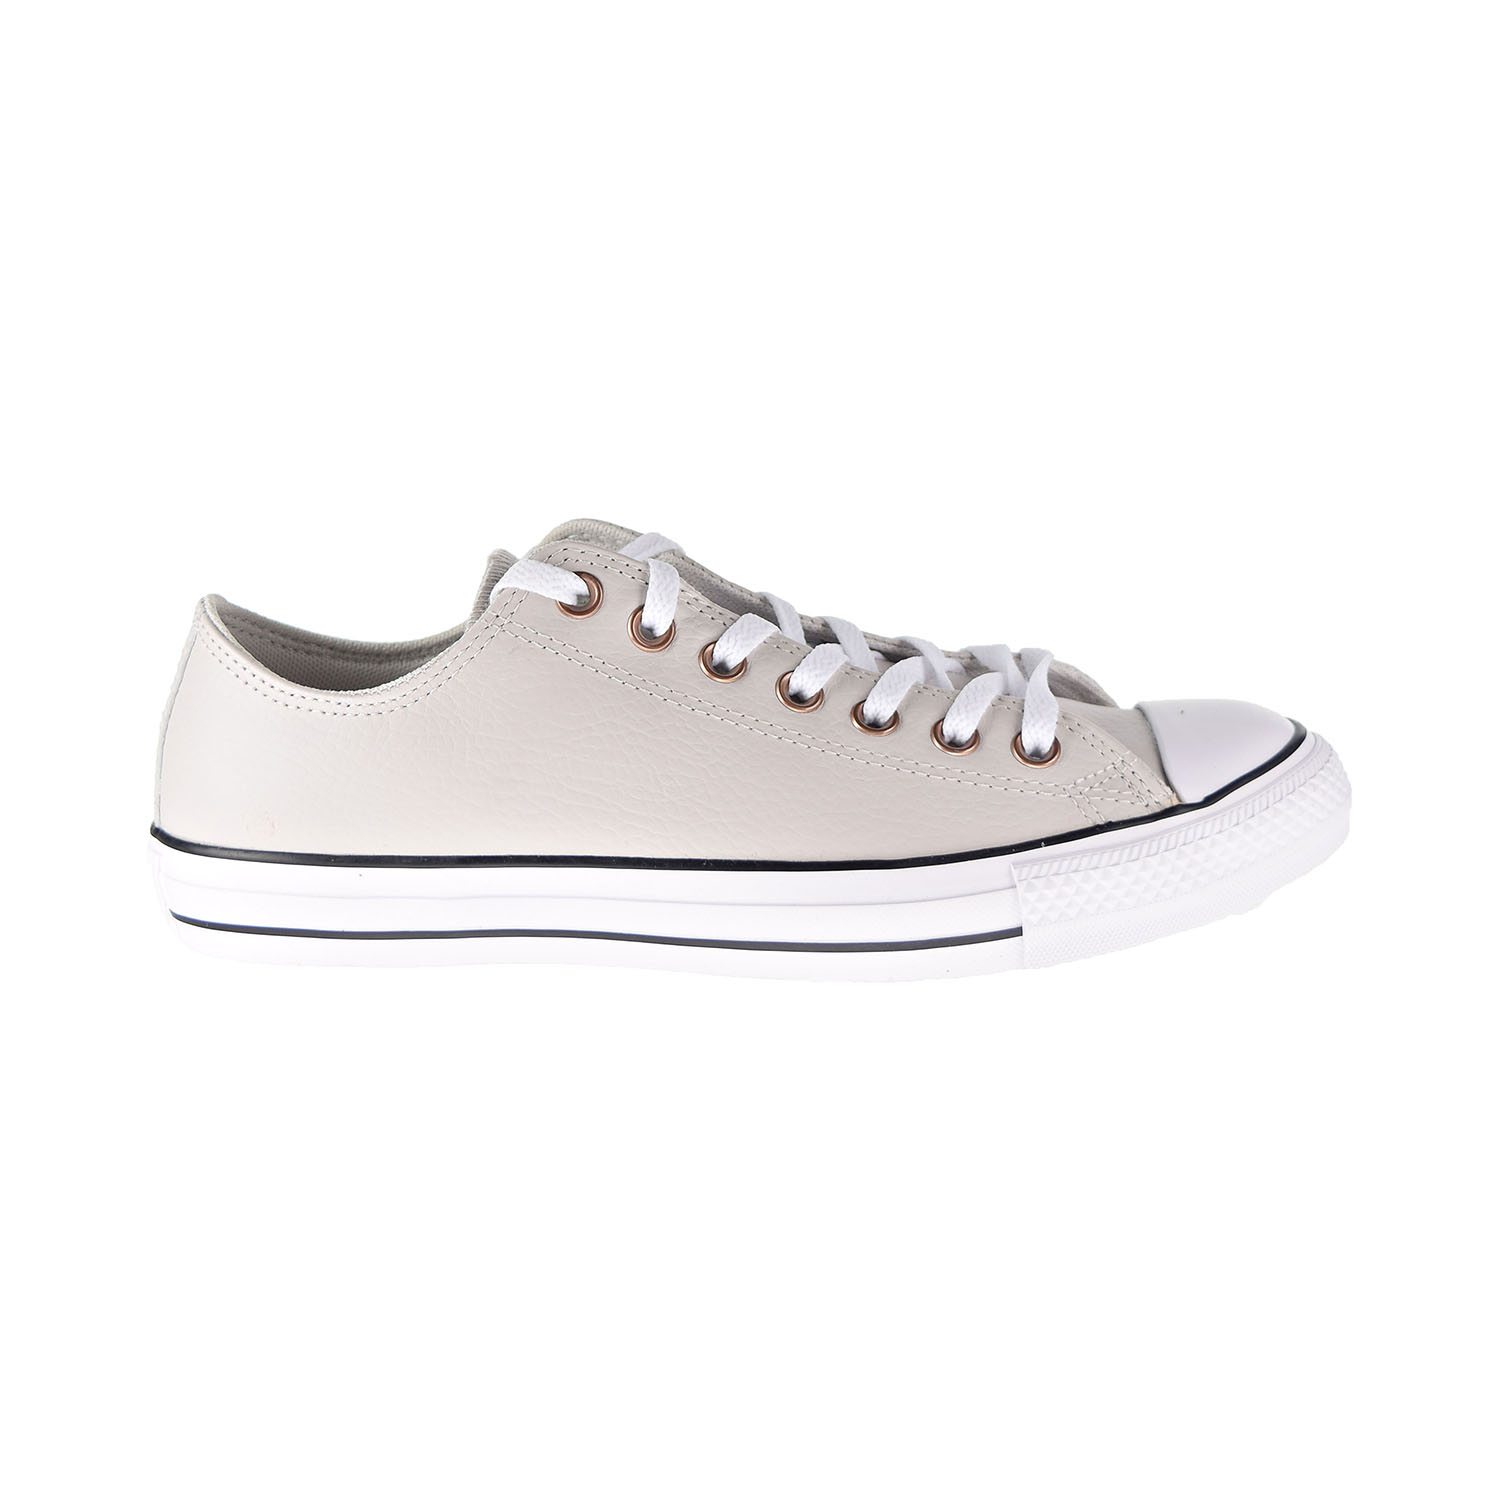 Converse Chuck Taylor All Star Ox Men's Shoes Pale Putty-White-Black 165194c - image 1 of 6